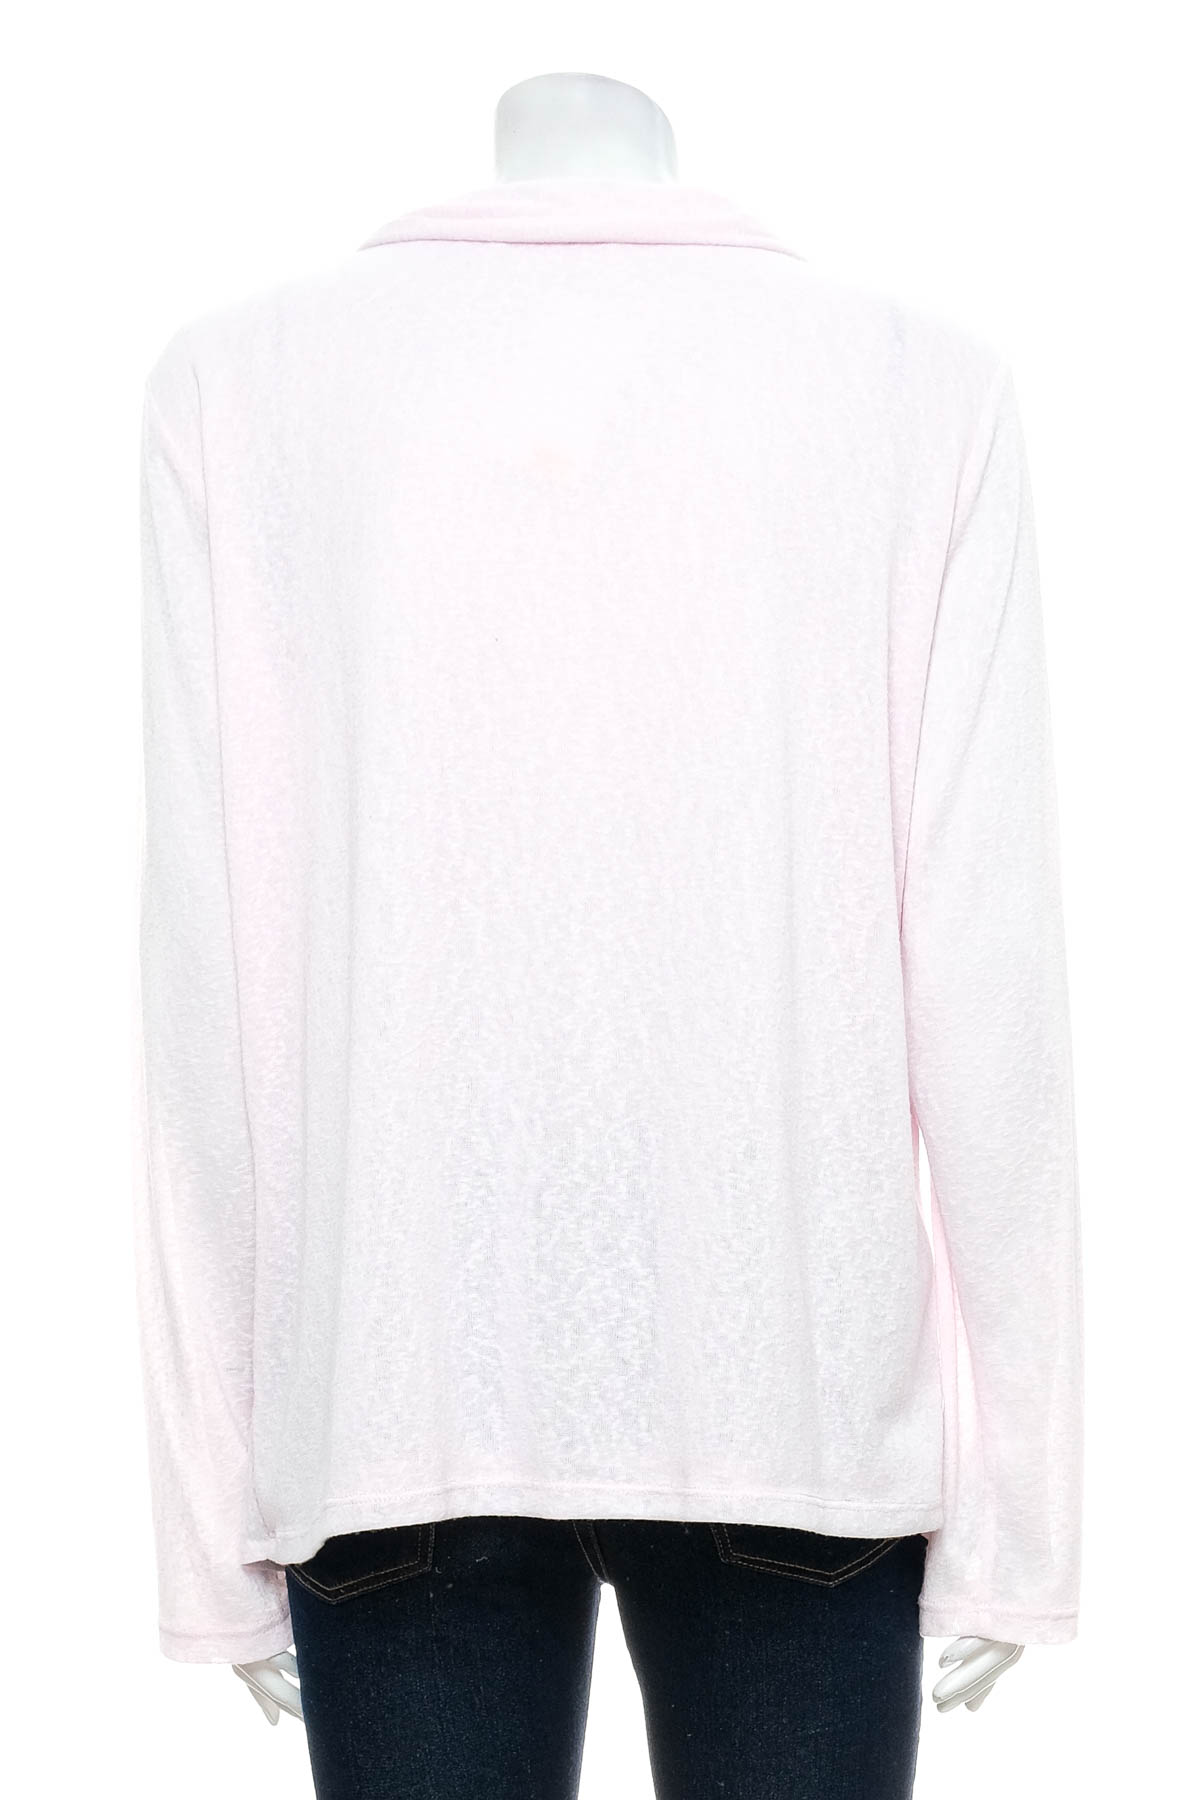 Women's sweater - Dunnes Stores - 1